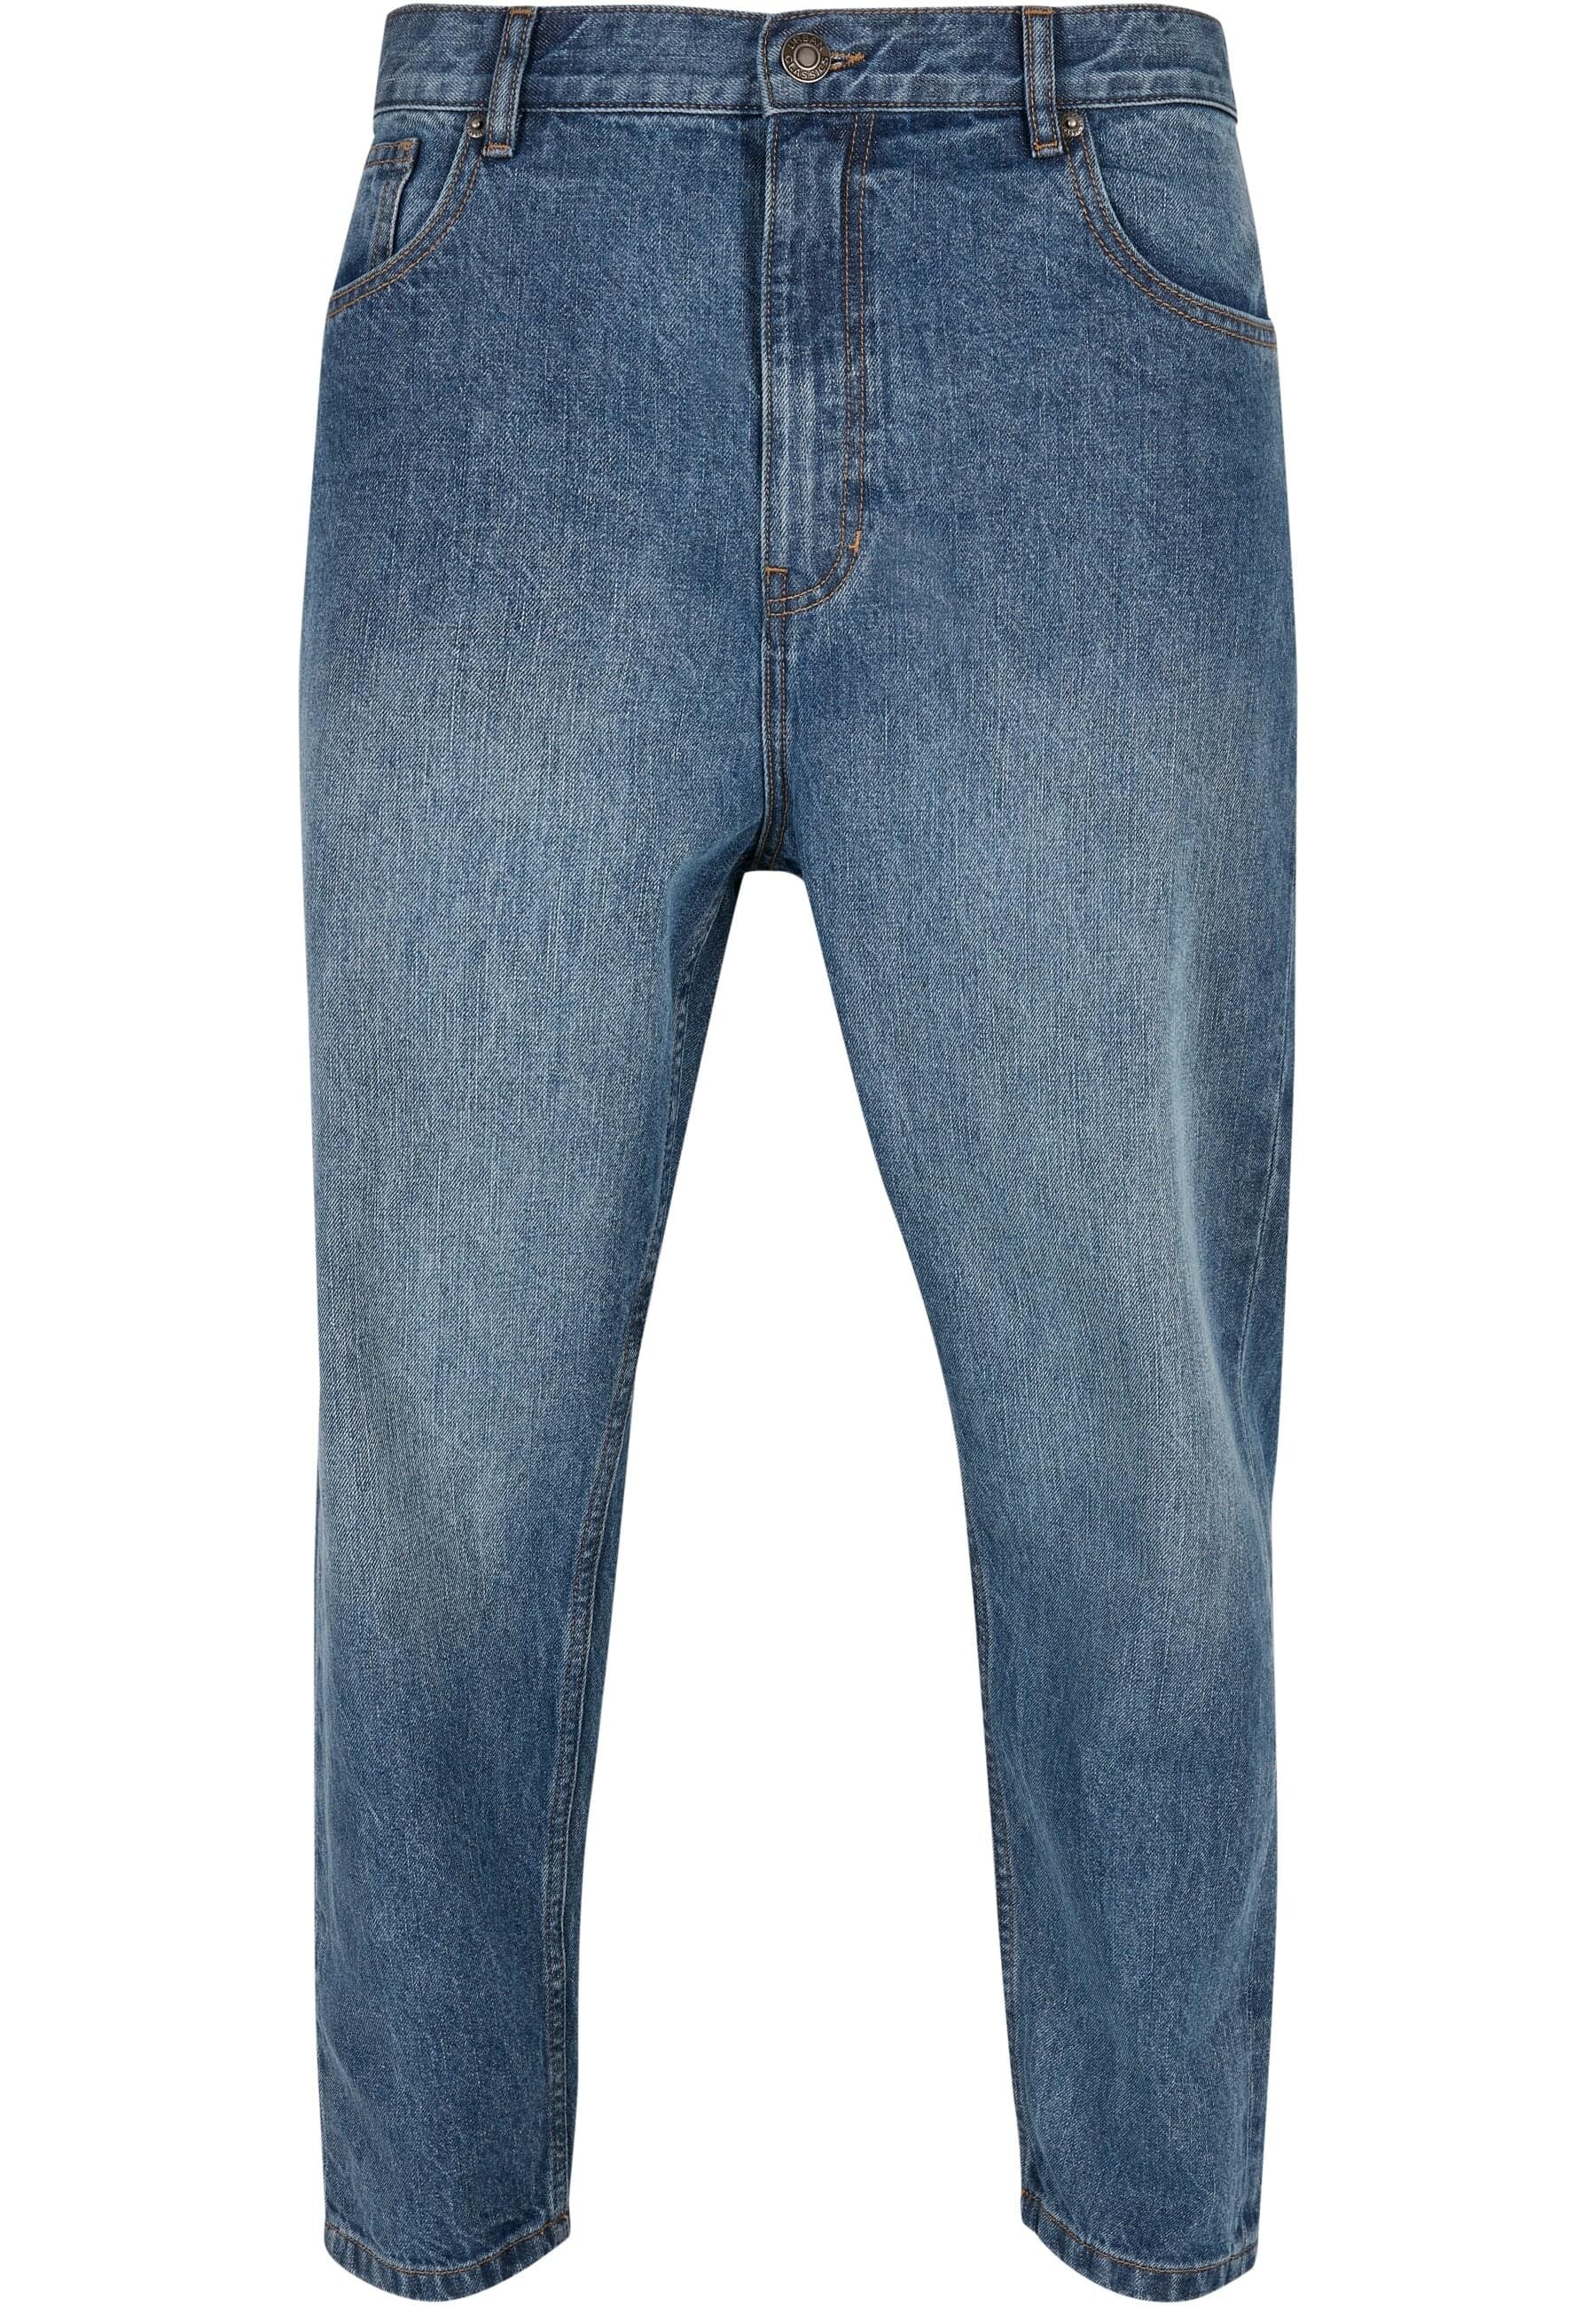 URBAN CLASSICS Bequeme Jeans »Urban Classics Herren Cropped Tapered Jeans«, (1 tlg.)